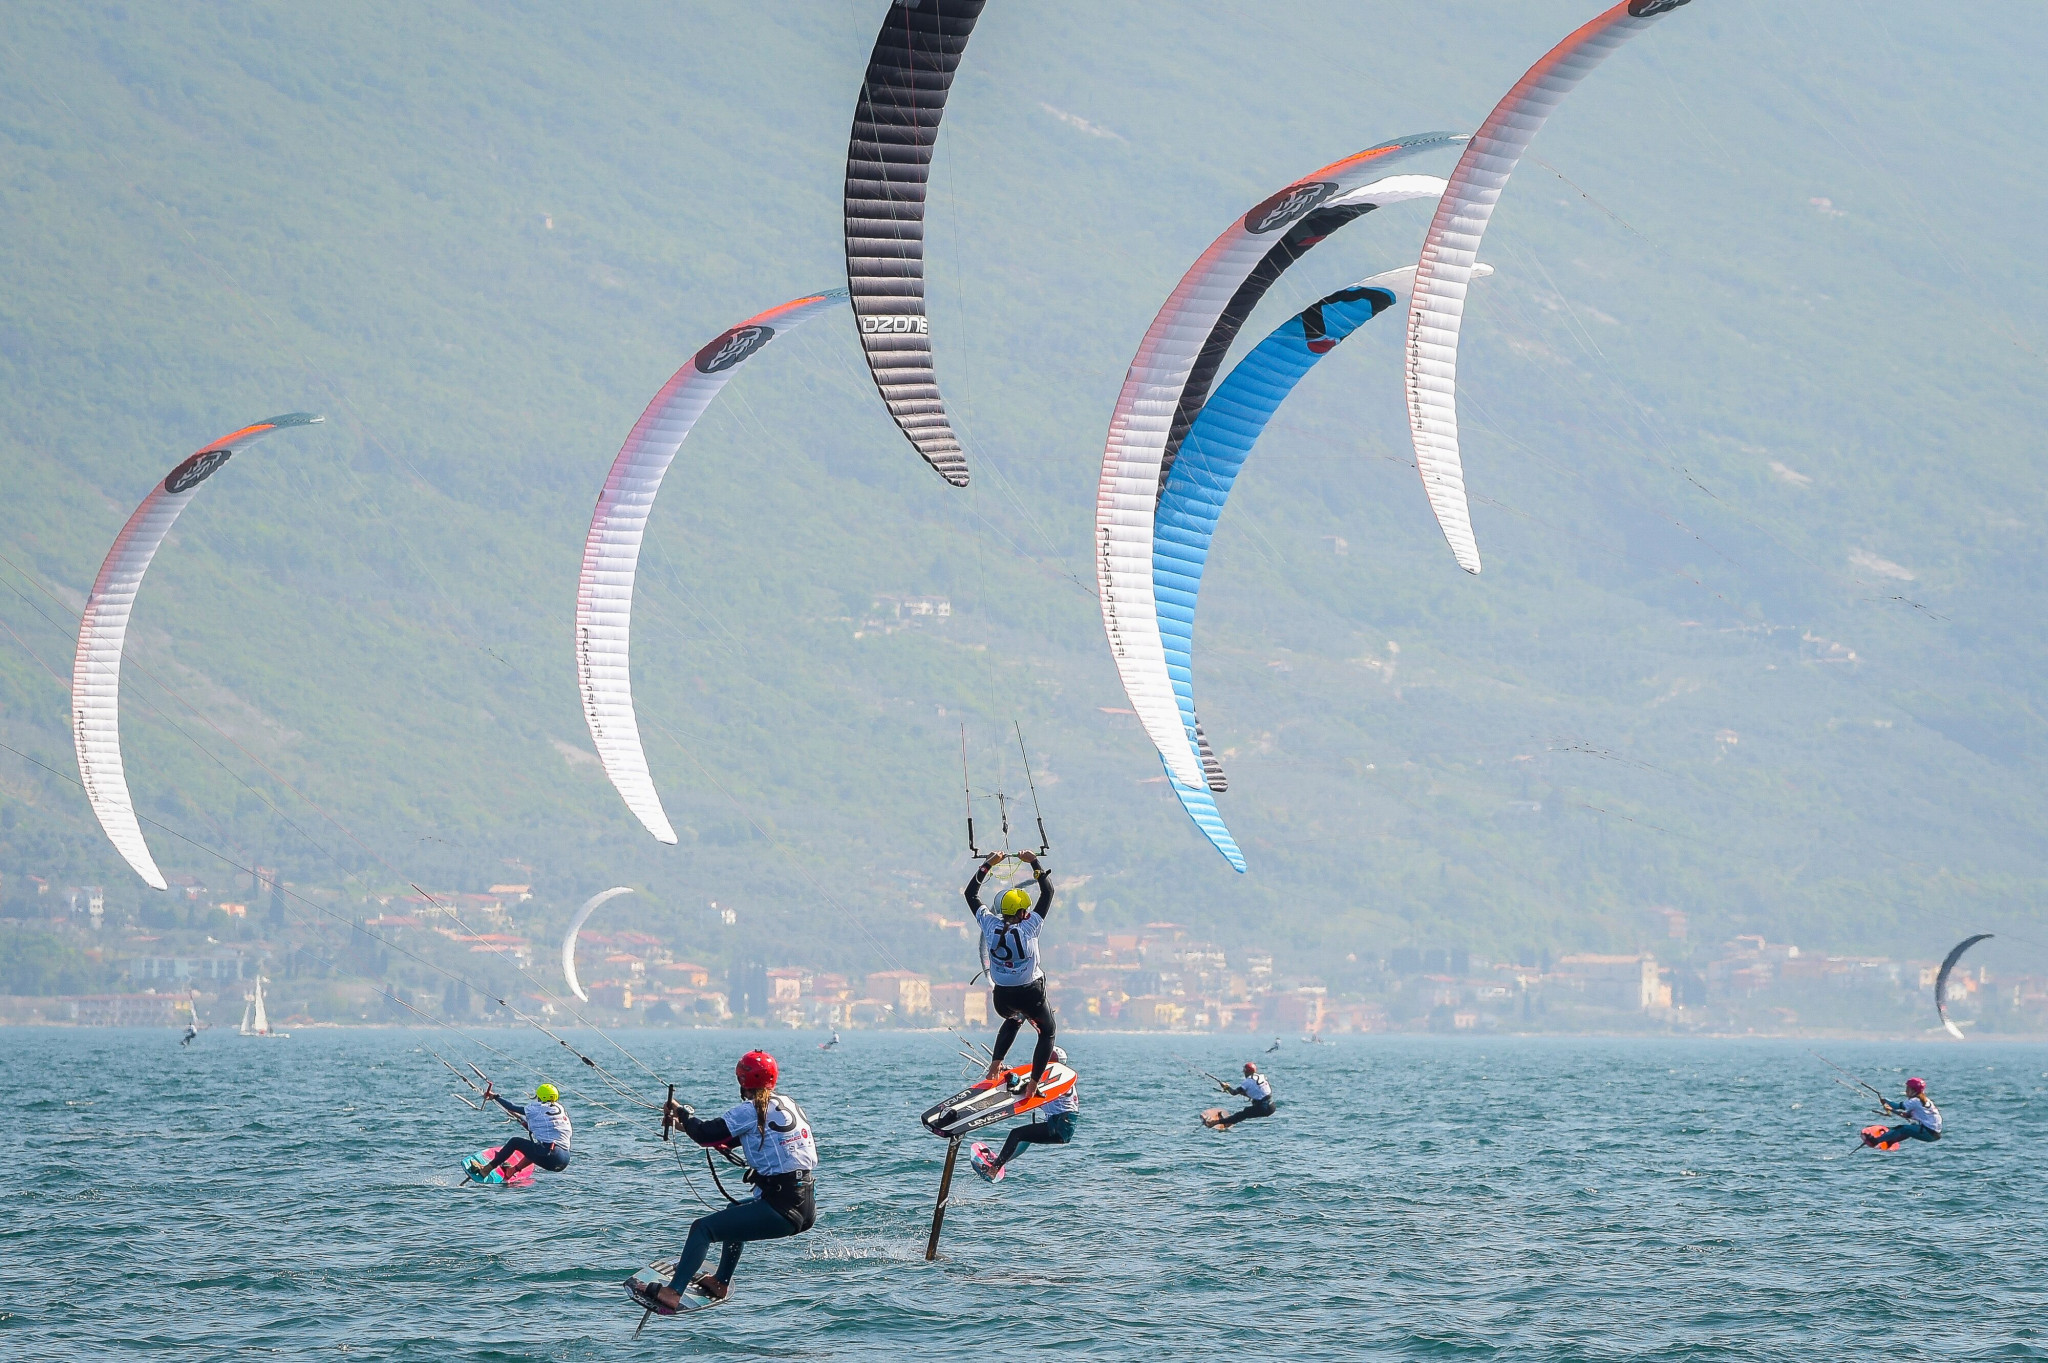 A mixed relay race format was trialled at the Formula Kite World Championships in Lake Garda ©International Kiteboarding Association